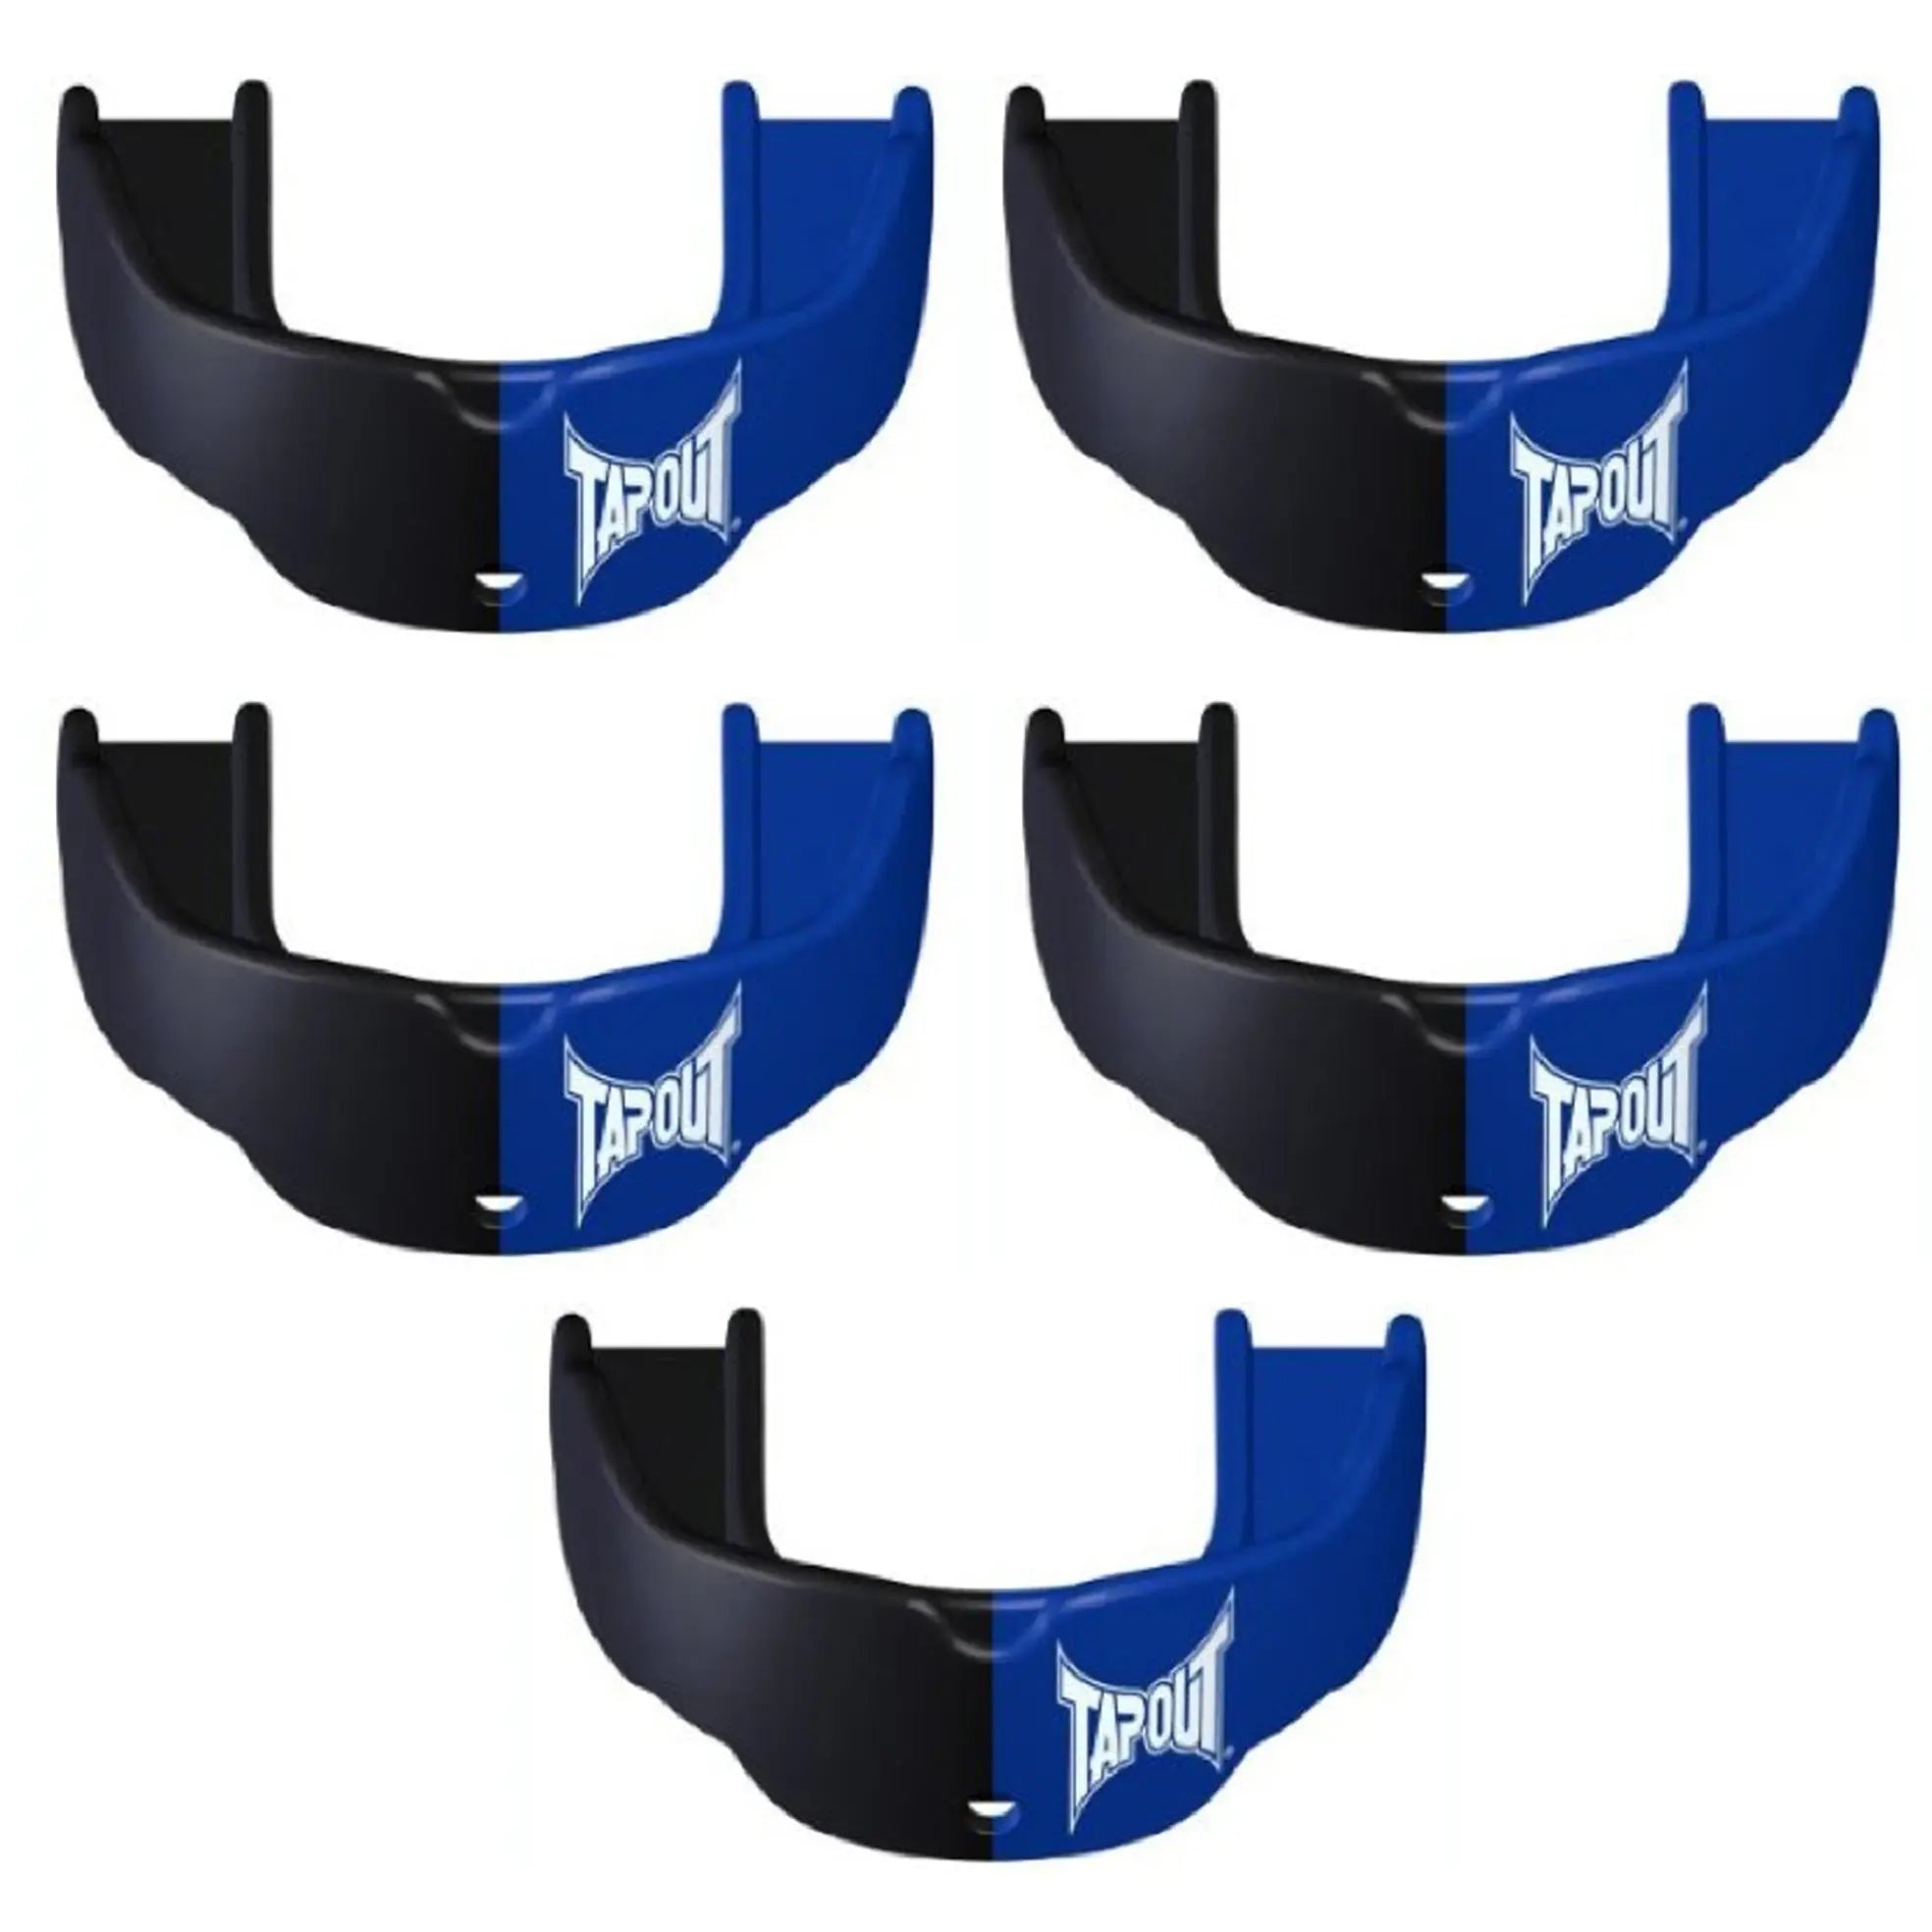 Tapout Youth Protective Sports Mouthguard with Strap 5-Pack  - Blue/Black Tapout